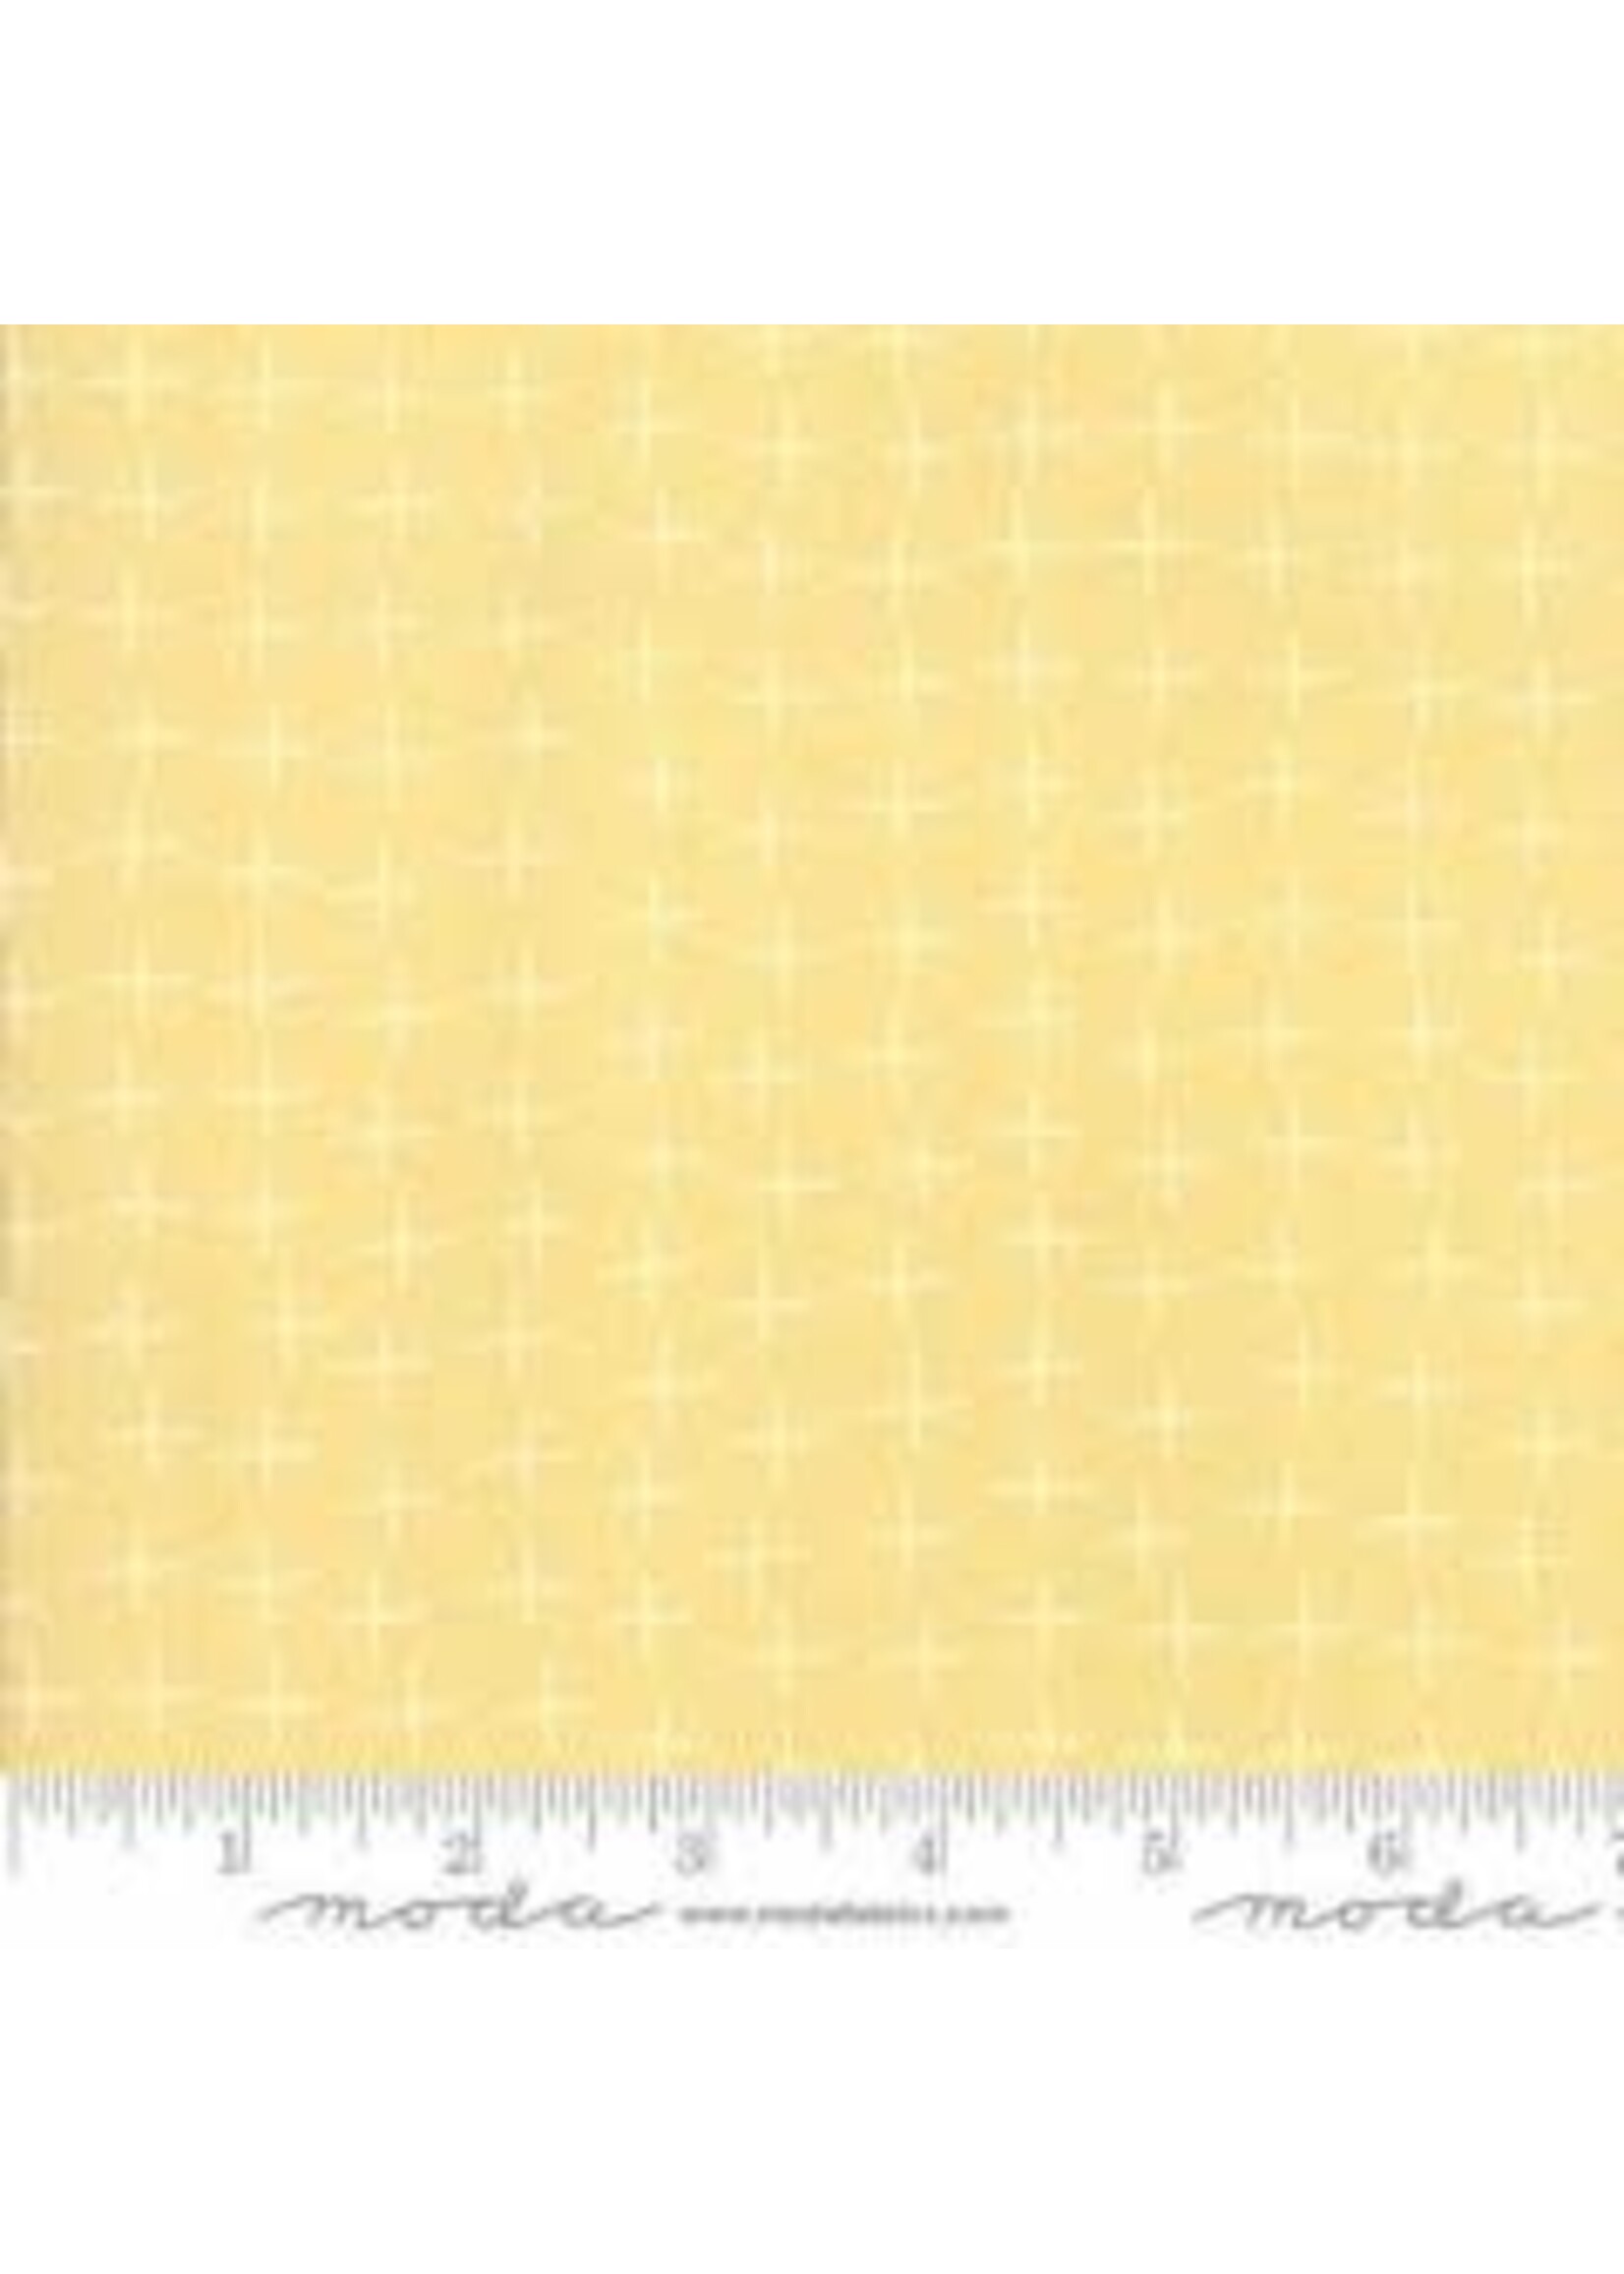 Sweetwater - Sunday Supper - Butterscotch - Coupon - 100 cm x 275 cm